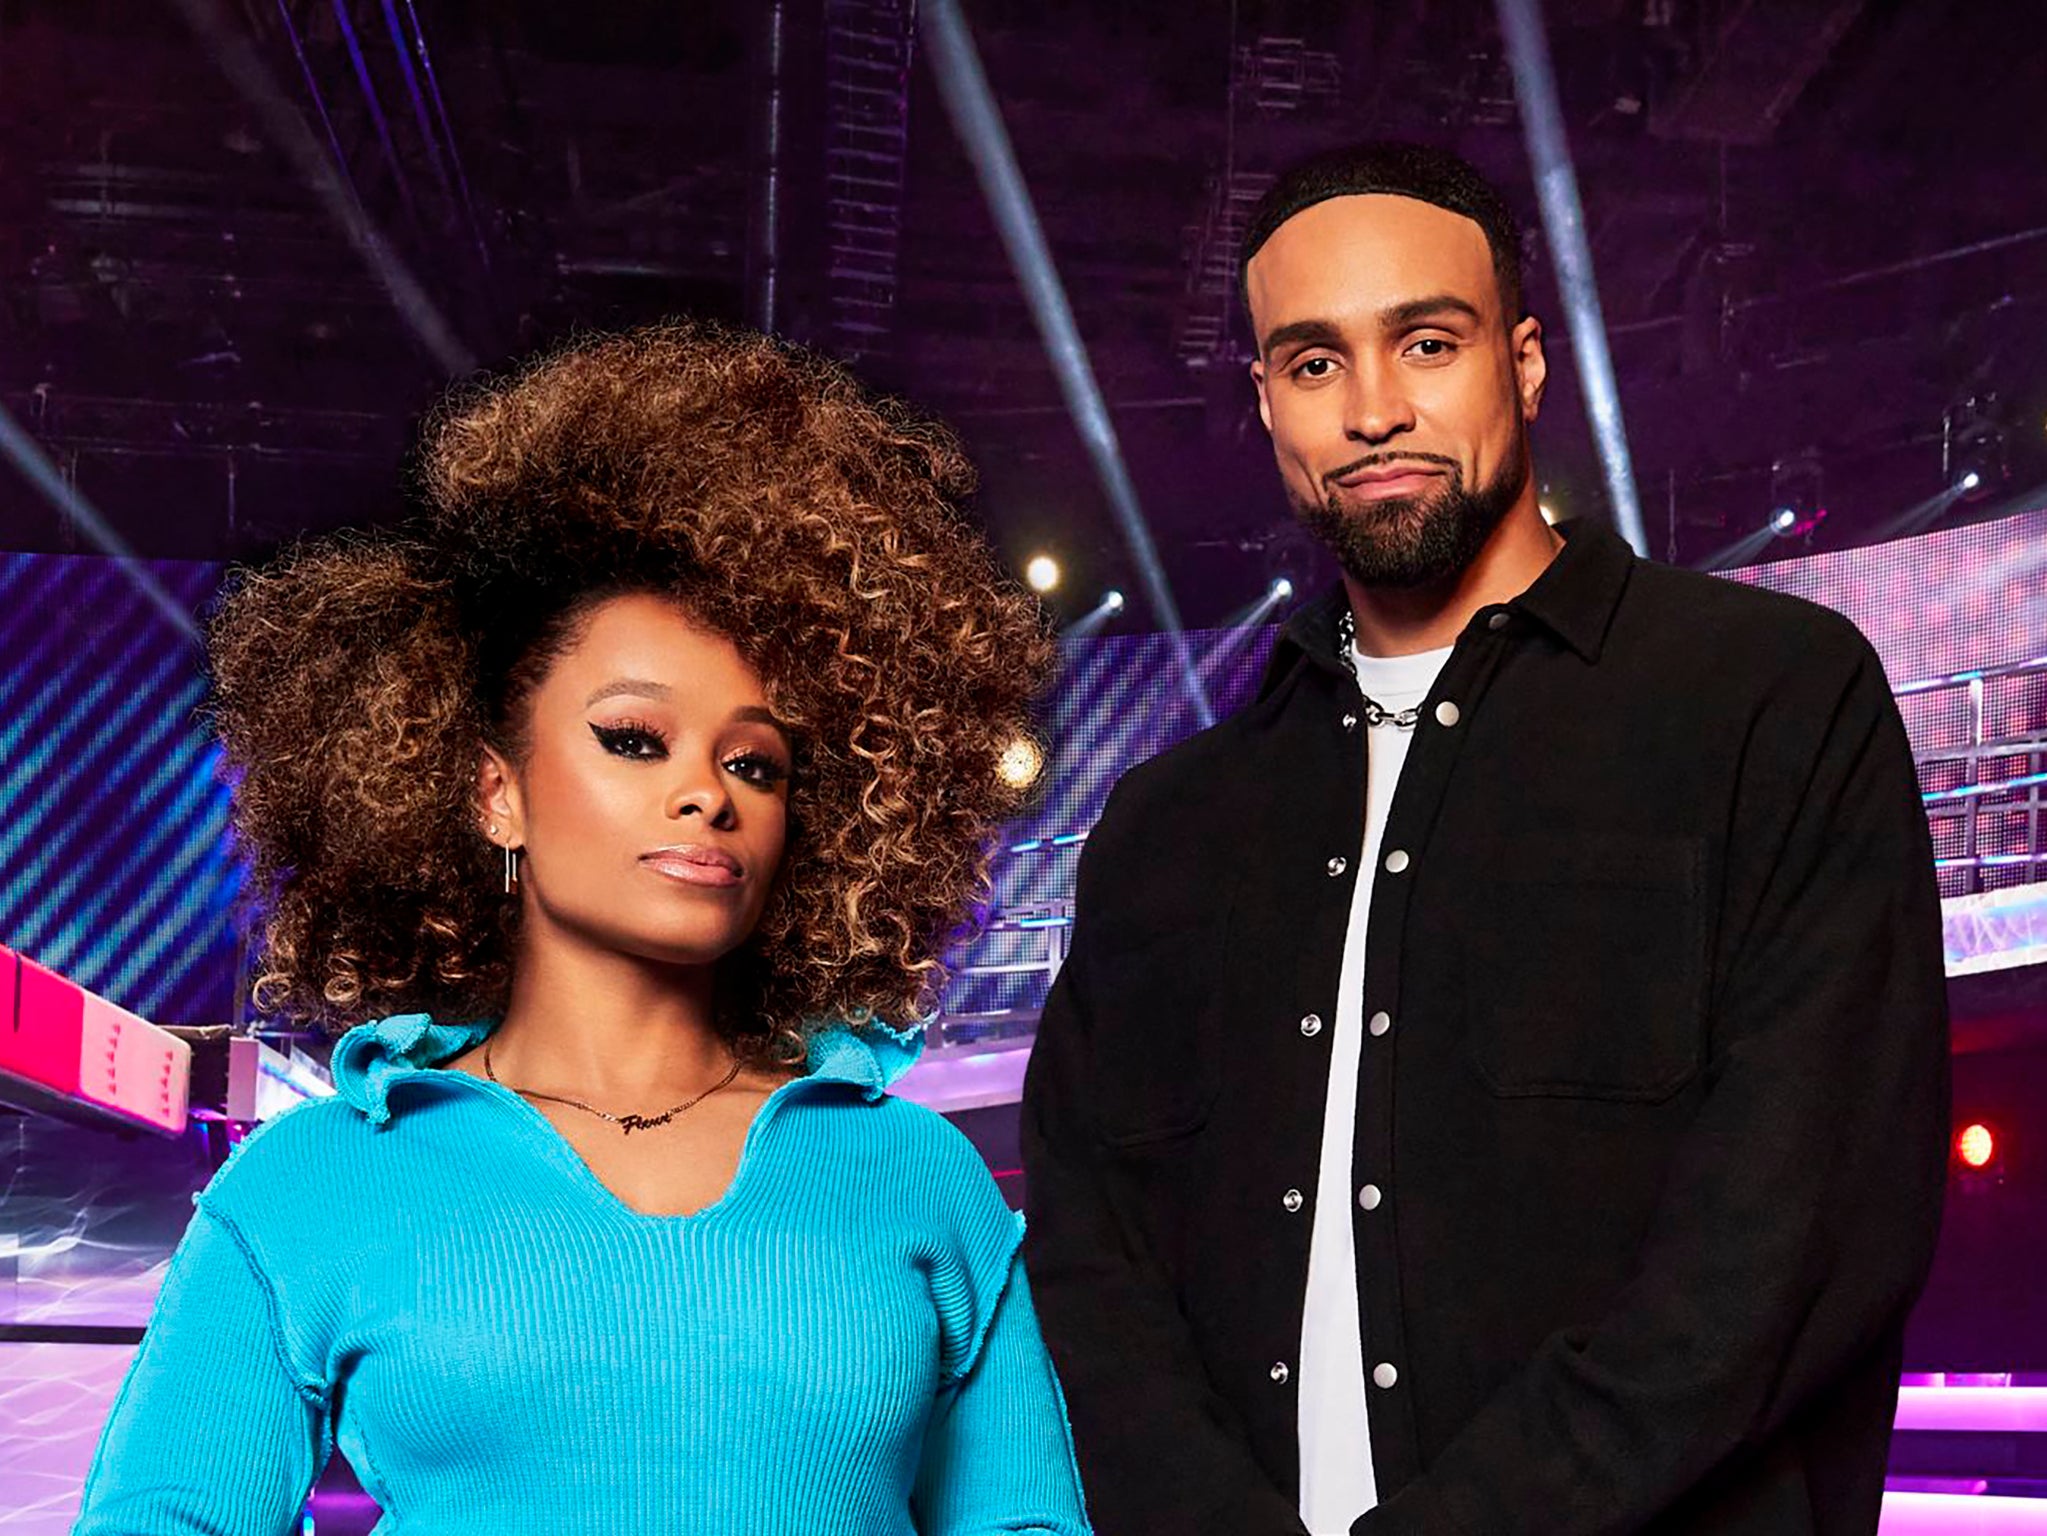 Fleur East and Ashley Banjo induce psychological peril in ITV’s ‘The Void'